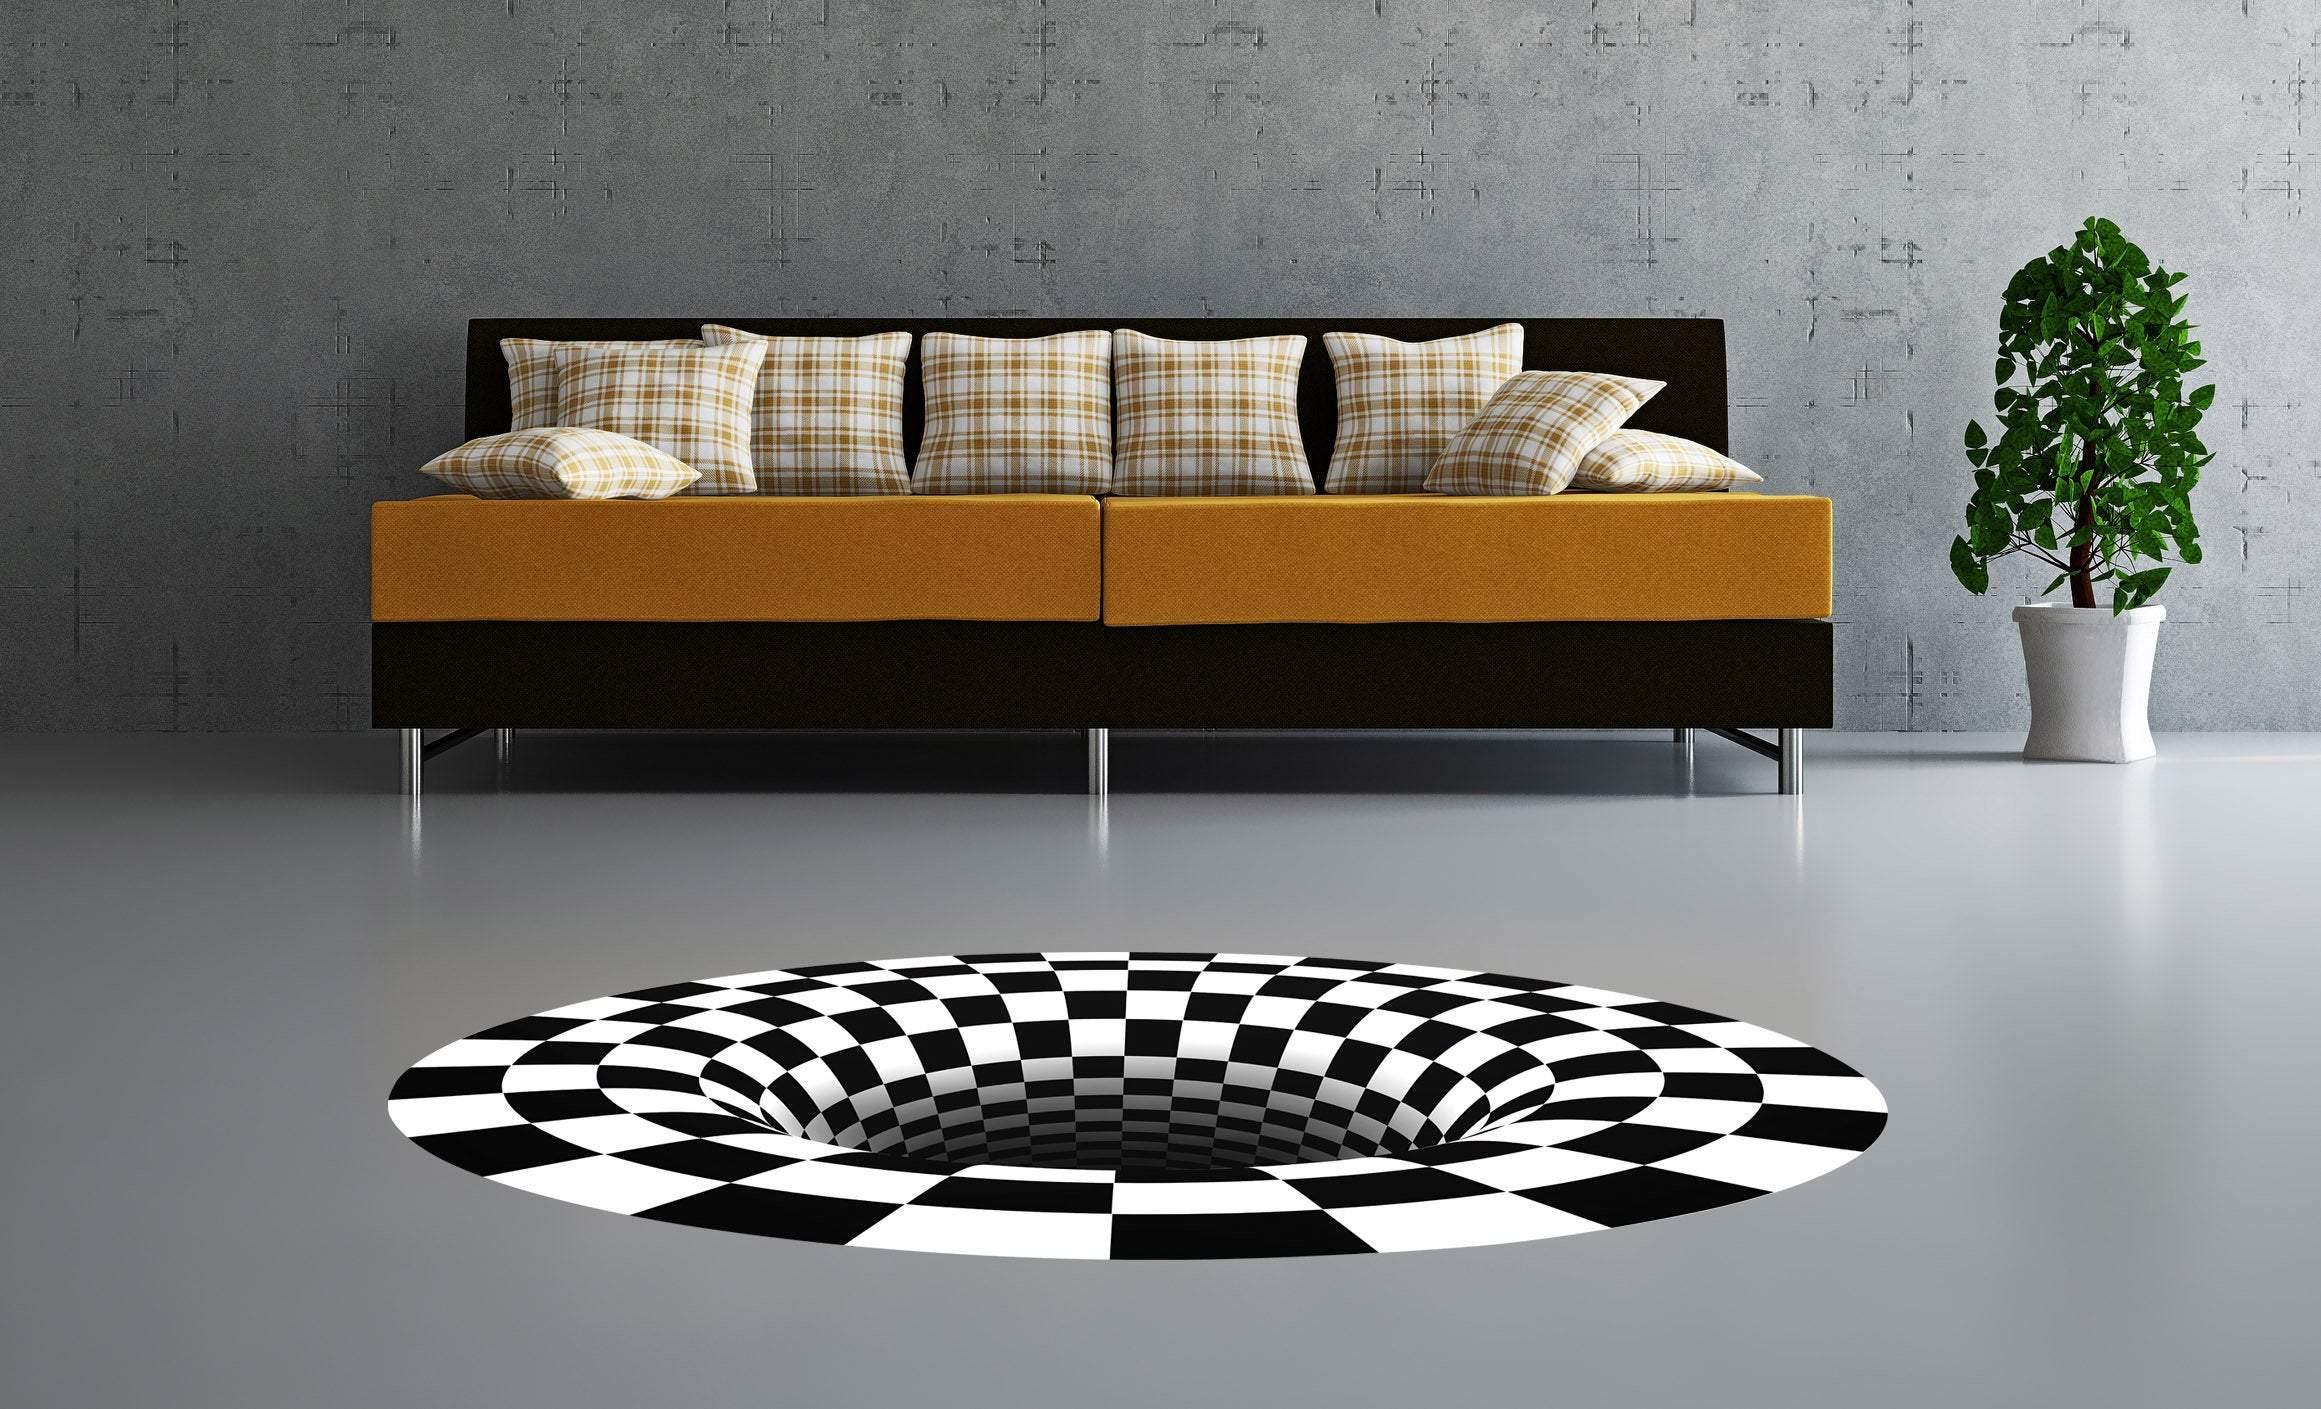 3D Floor Vortec Illusion printed on a durable fabric decal